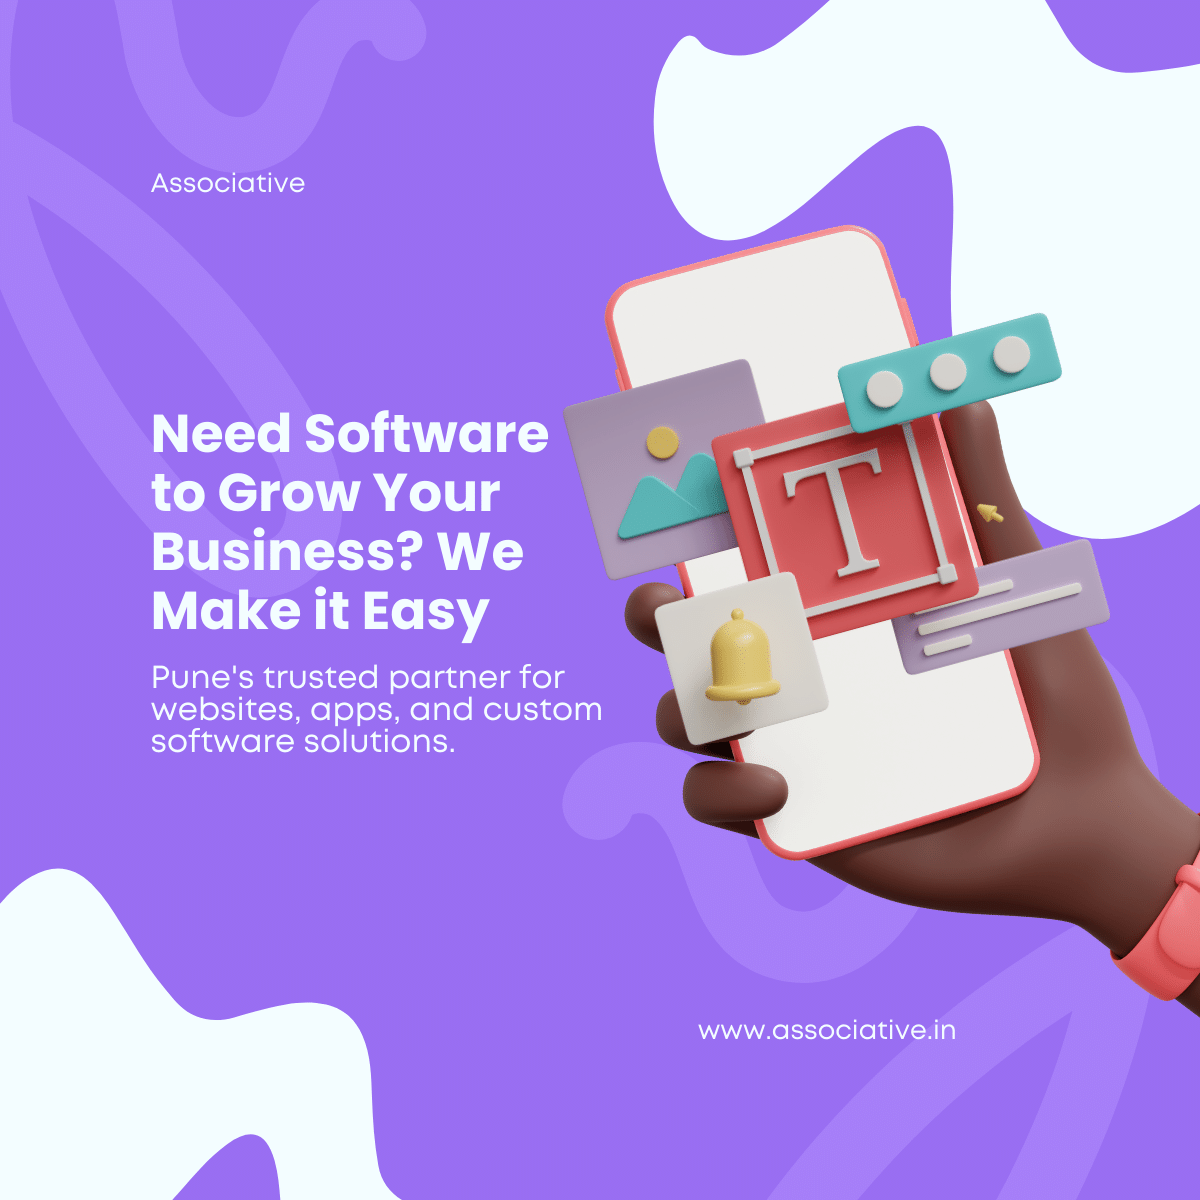 Need Software to Grow Your Business? We Make it Easy.